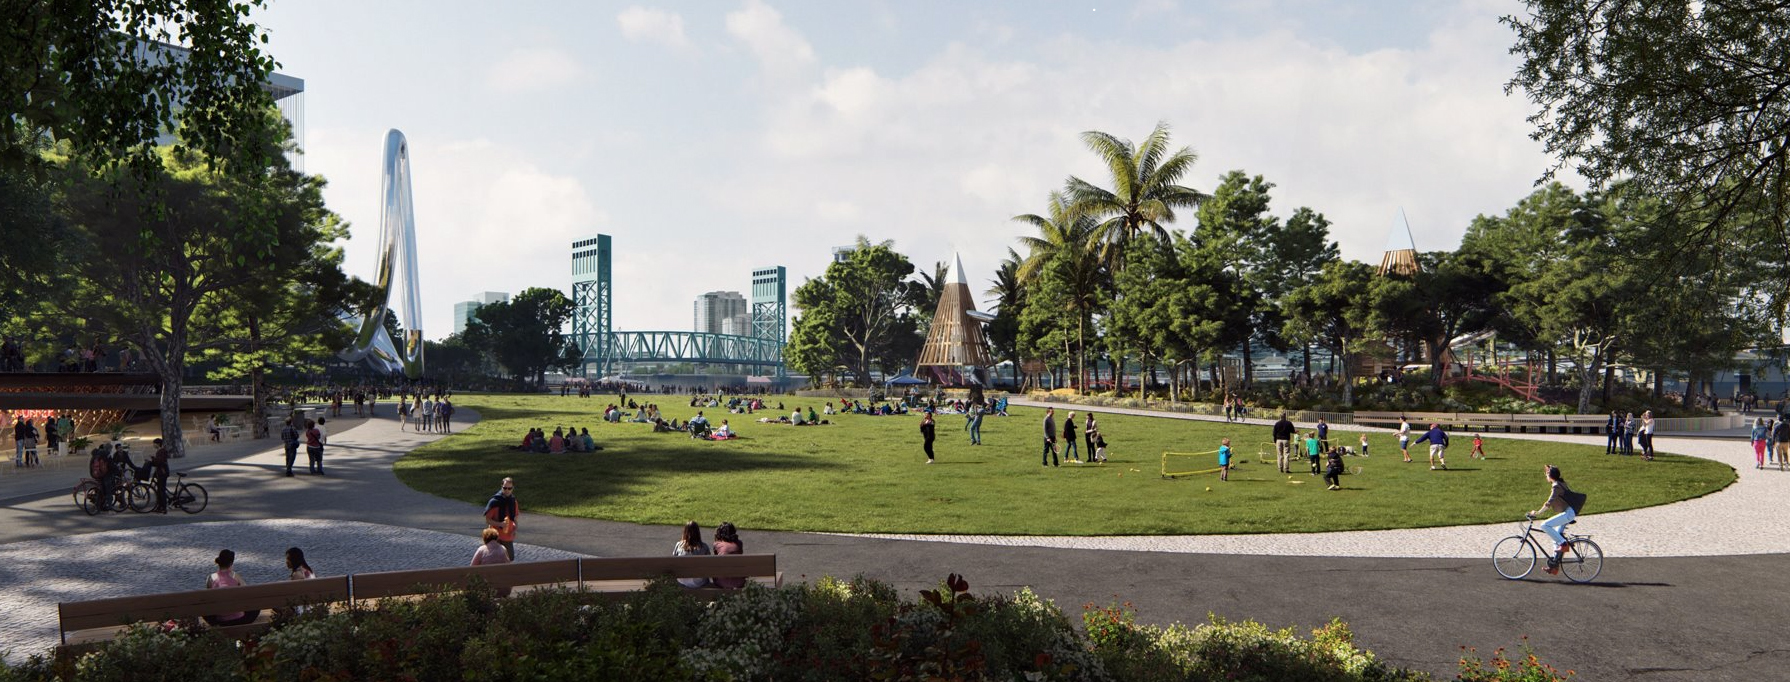 An artist's rendering of Riverfront Park, the former Jacksonville Landing site now called Riverfront Plaza.